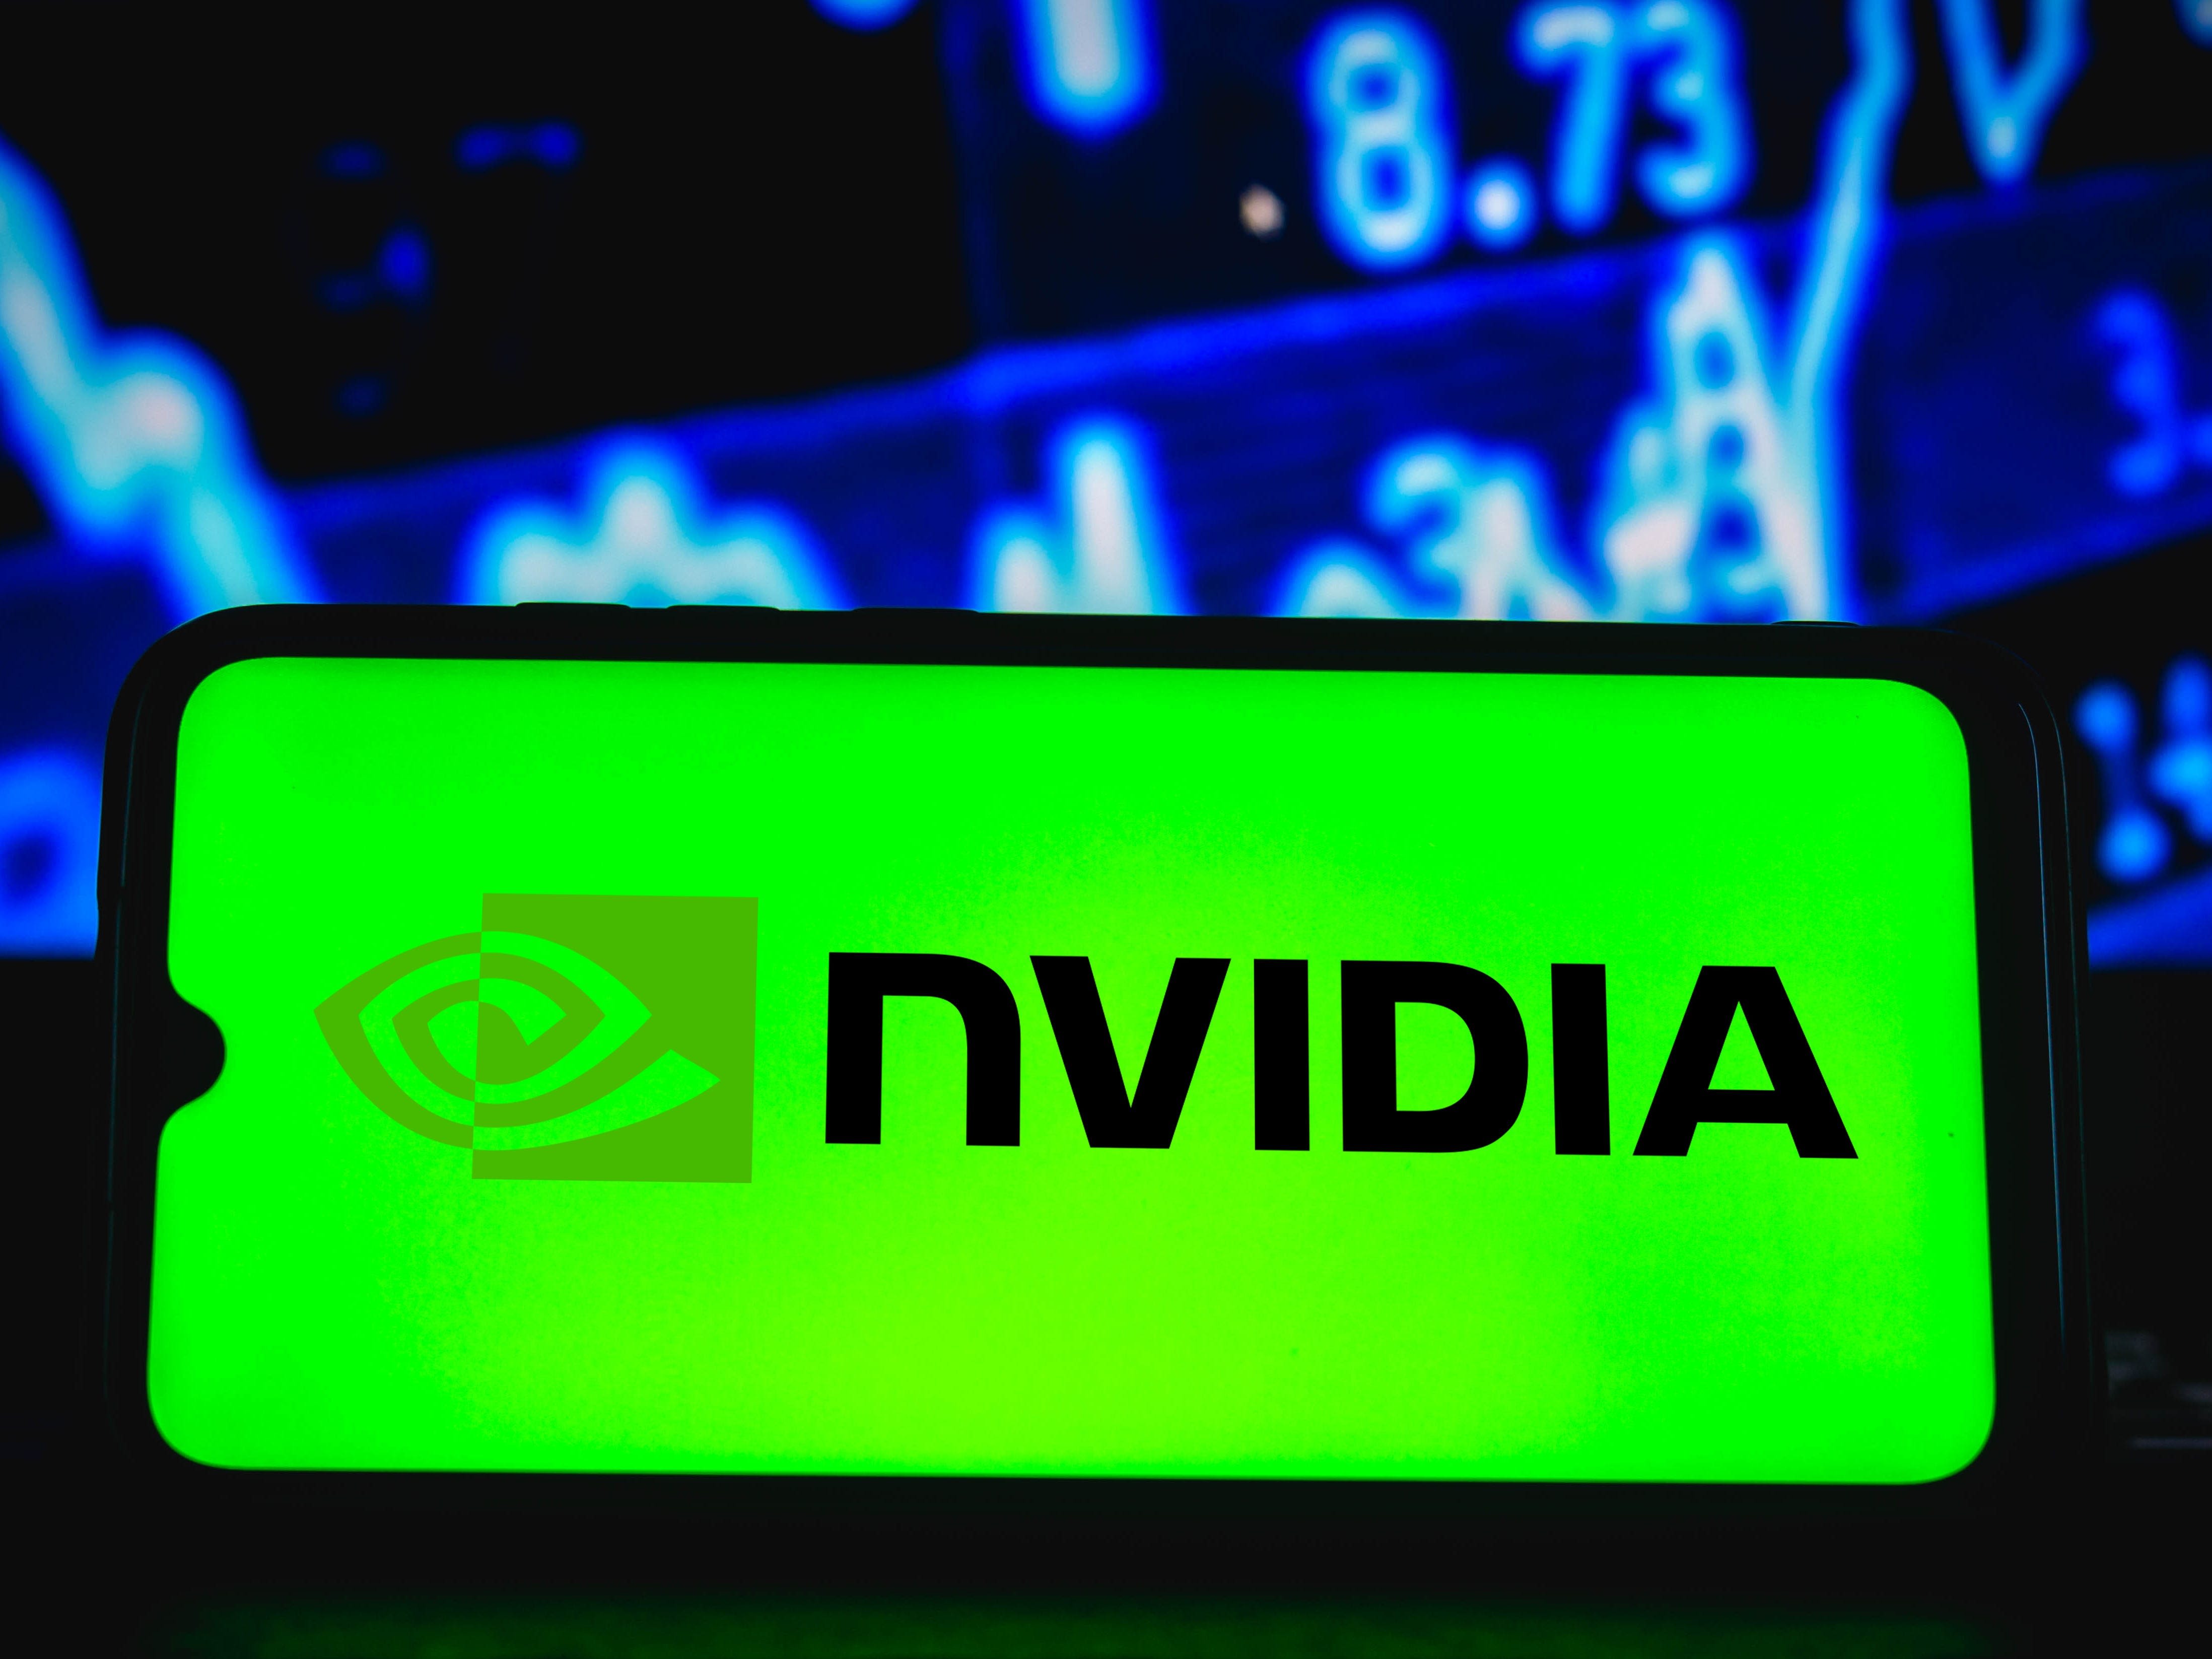 Why one analyst sees a 20% drop for Nvidia stock in the next 18 months